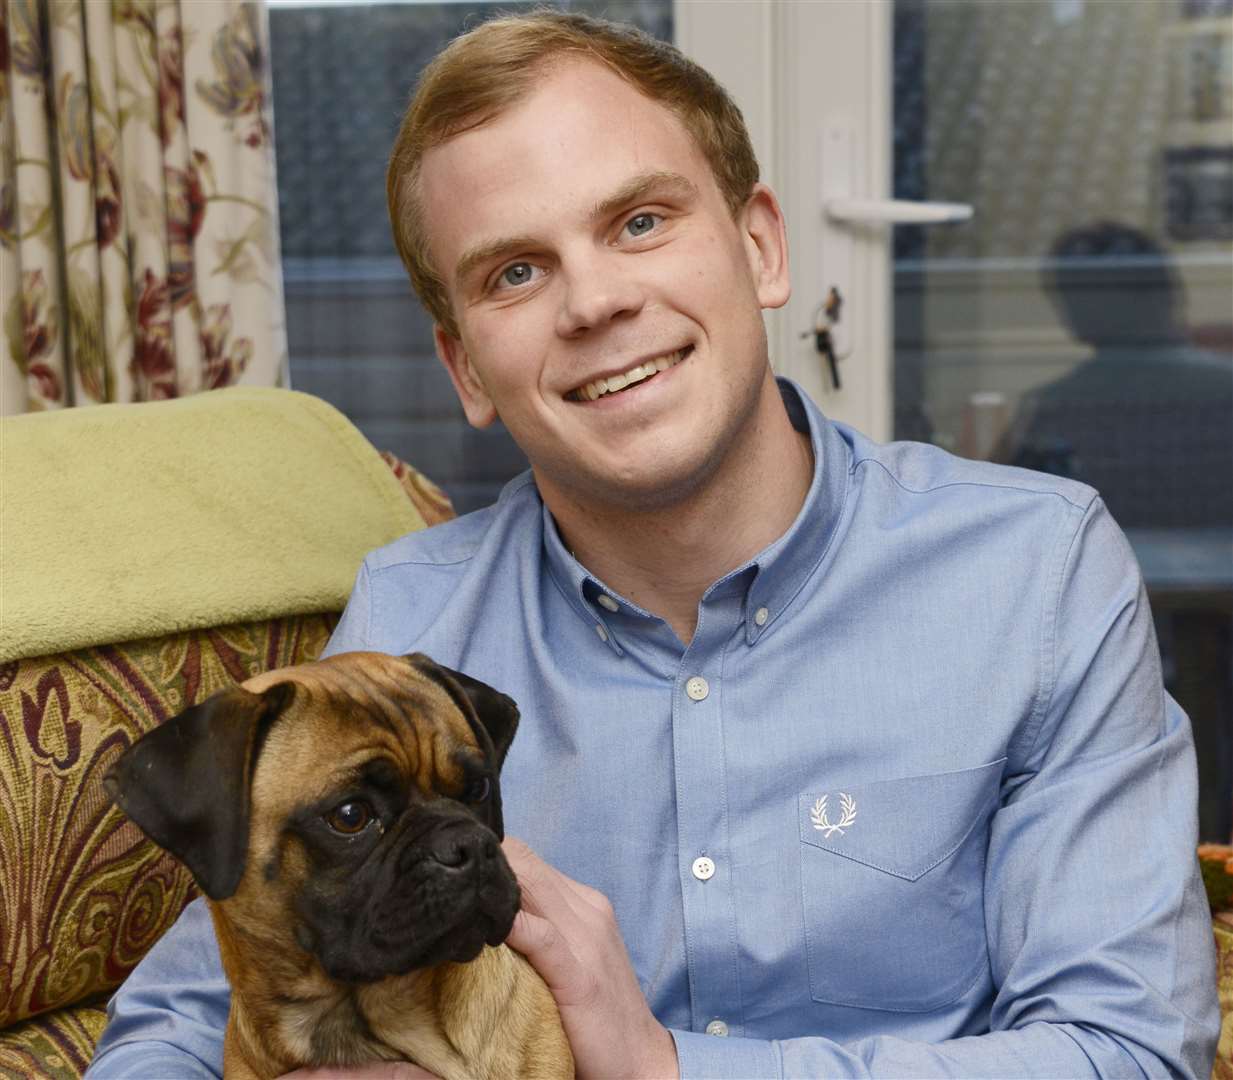 Toby Winson with his dog Simba